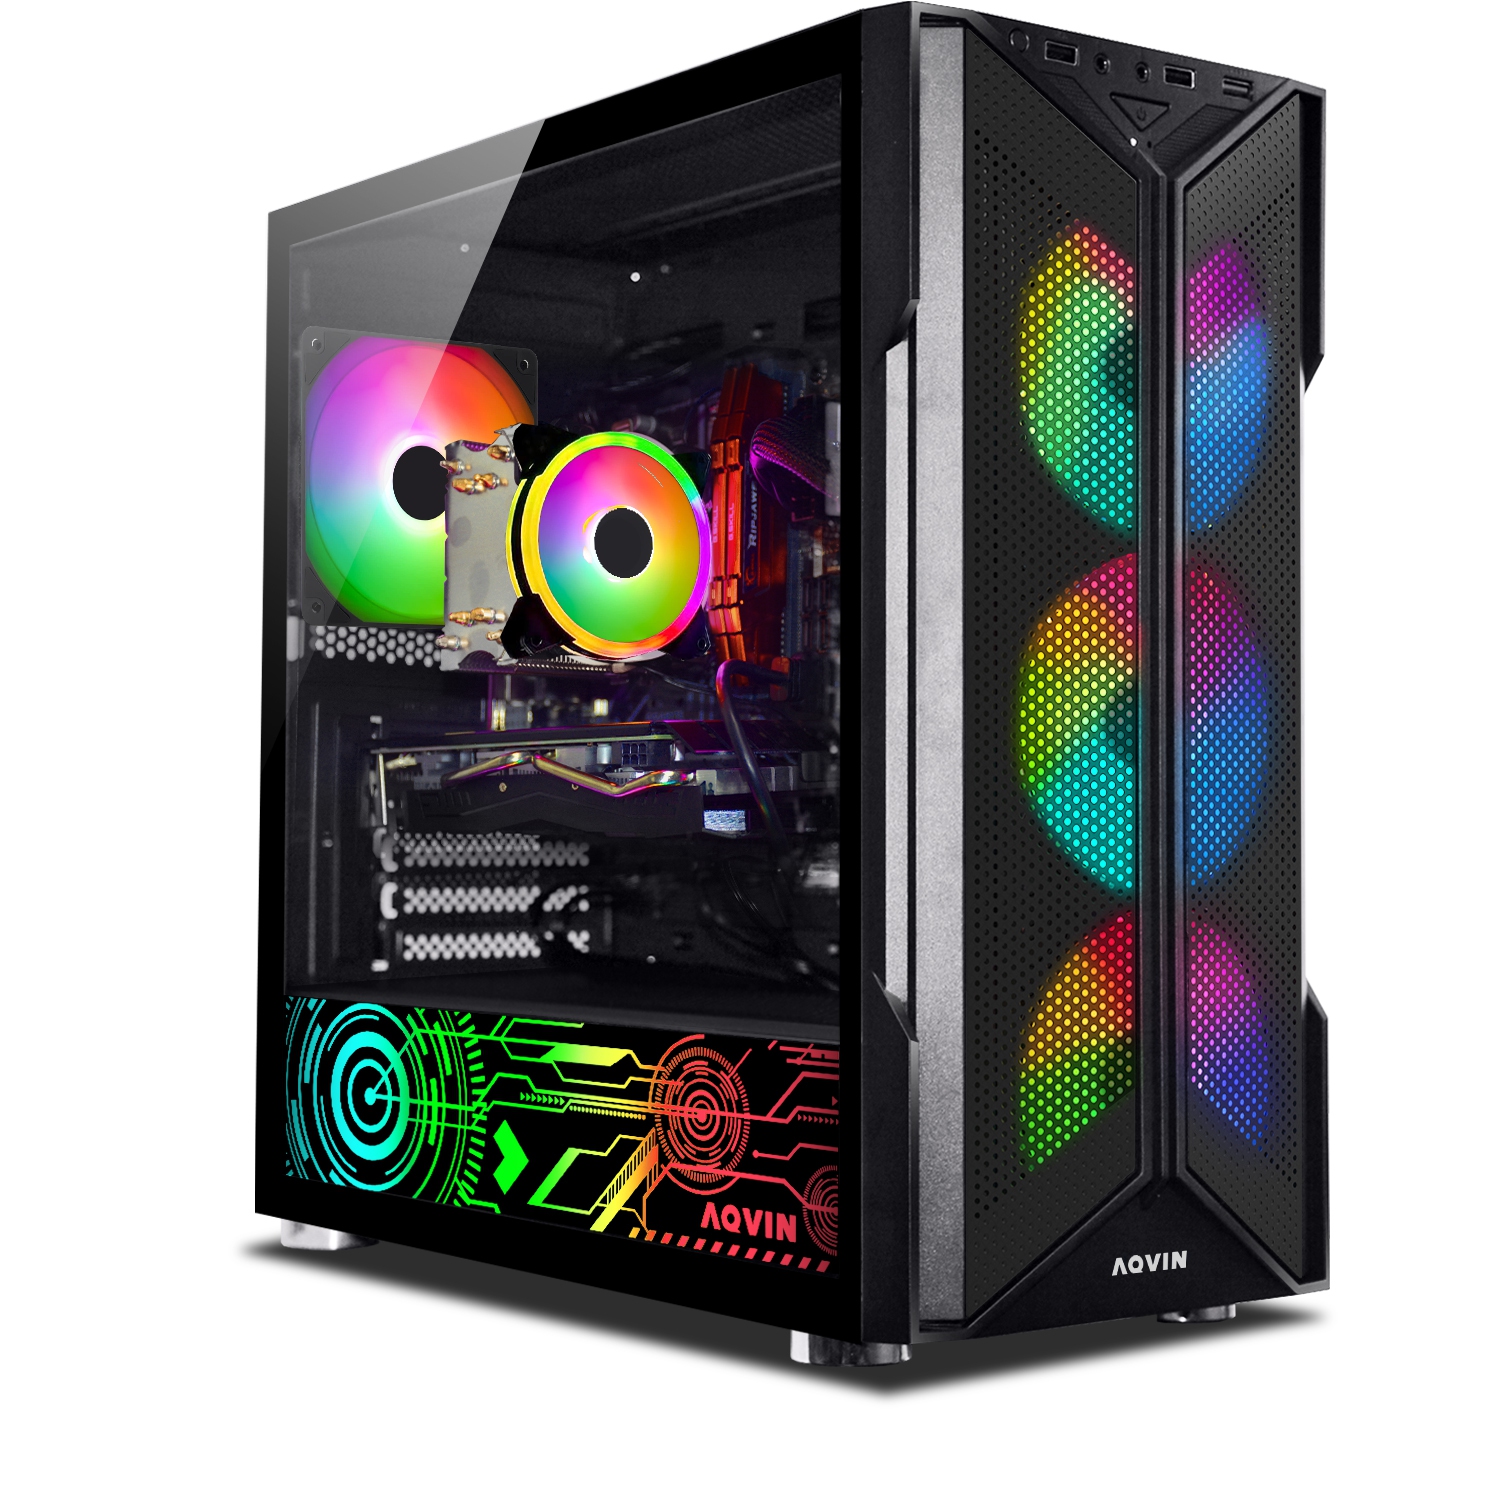 AQVIN-AQ20 Gaming PC Tower Desktop Computer - RGB (Intel Core i5 processor/ 32GB DDR4 RAM/ 1TB SSD/ GeForce RTX 3050 8GB/ Windows 11) Gaming Keyboard and Mouse - Only at Best Buy